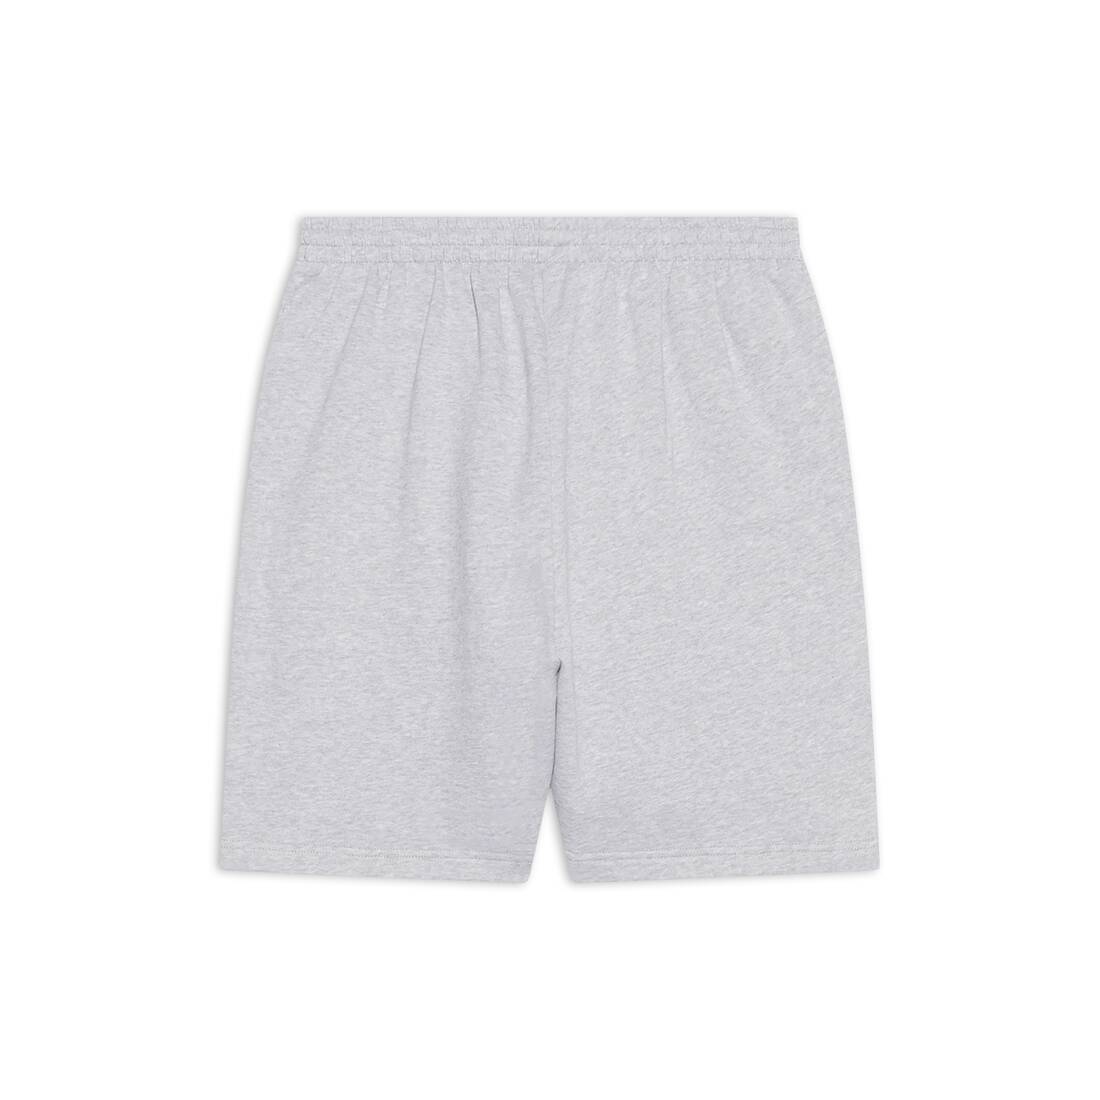 Men's Political Campaign Sweat Shorts in Grey